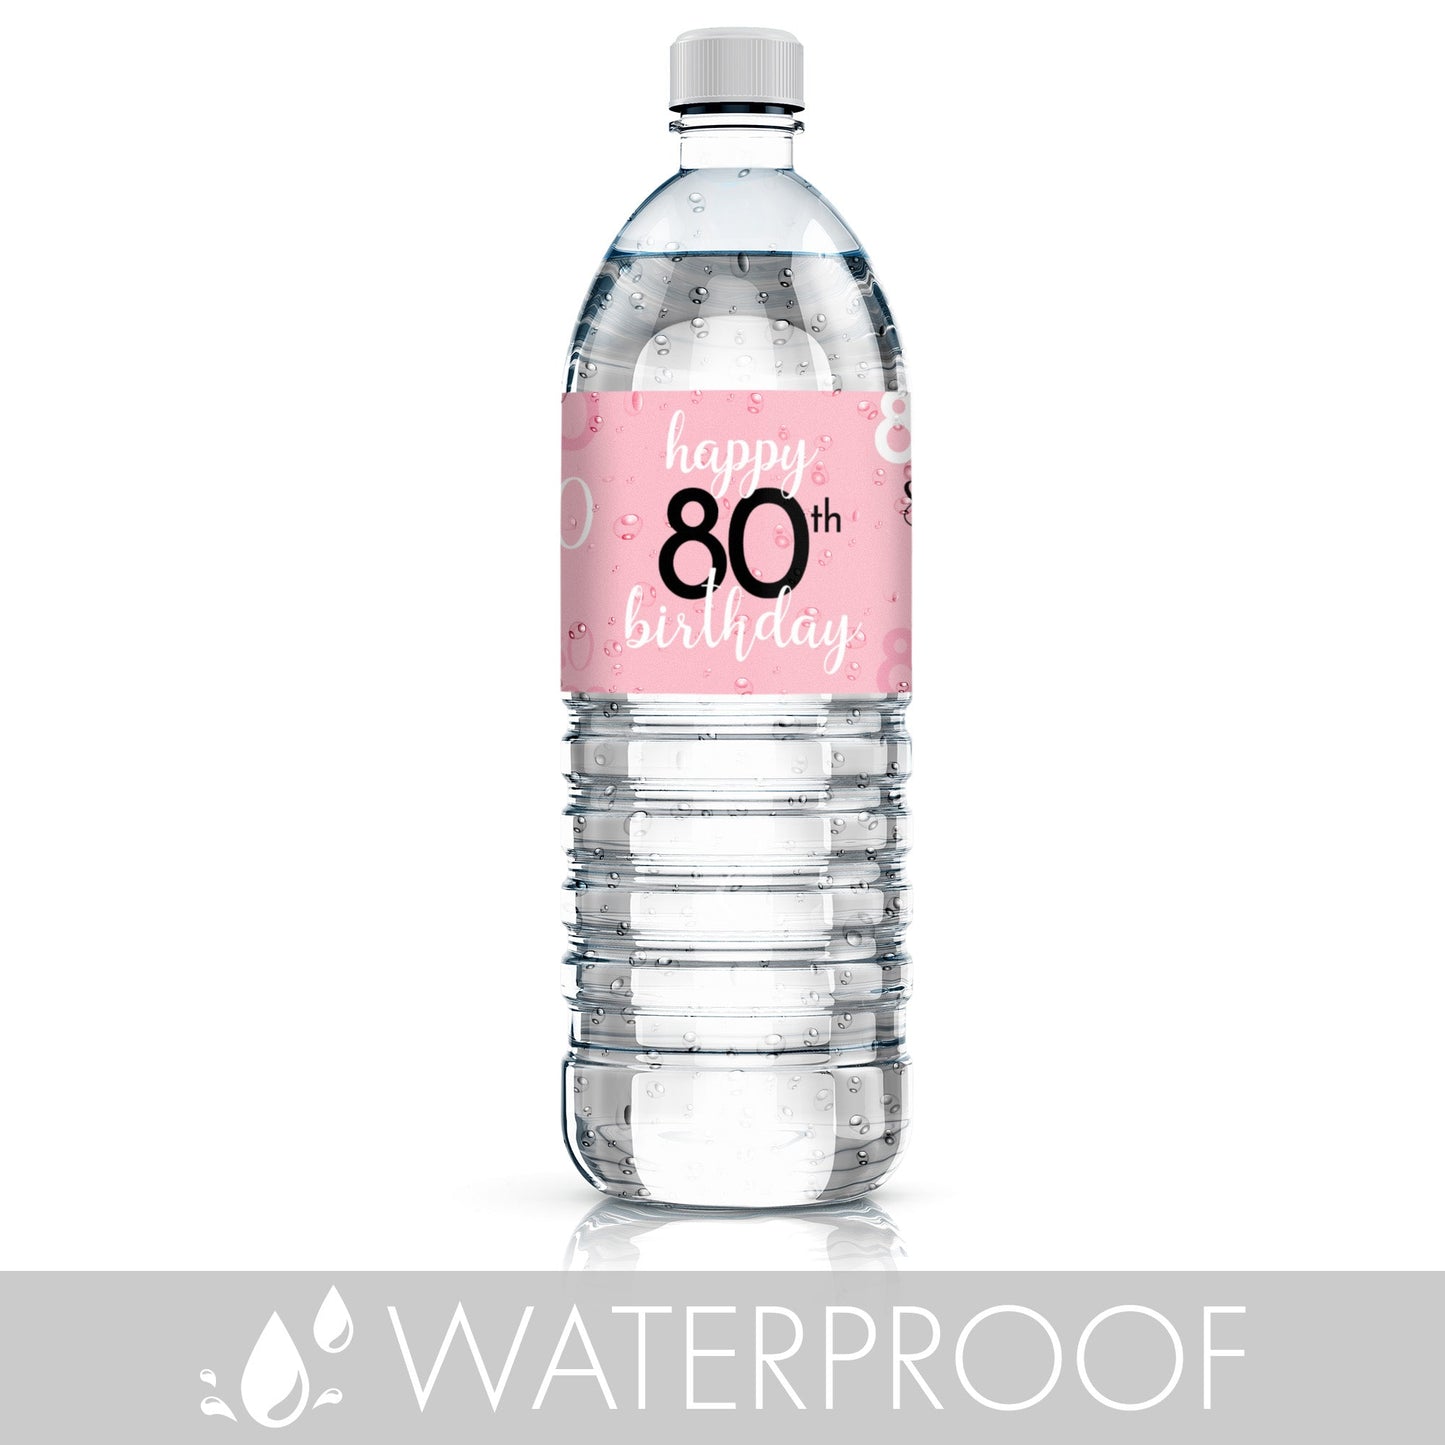 Personalize your water bottles with waterproof labels in a stylish 80th pink and black design